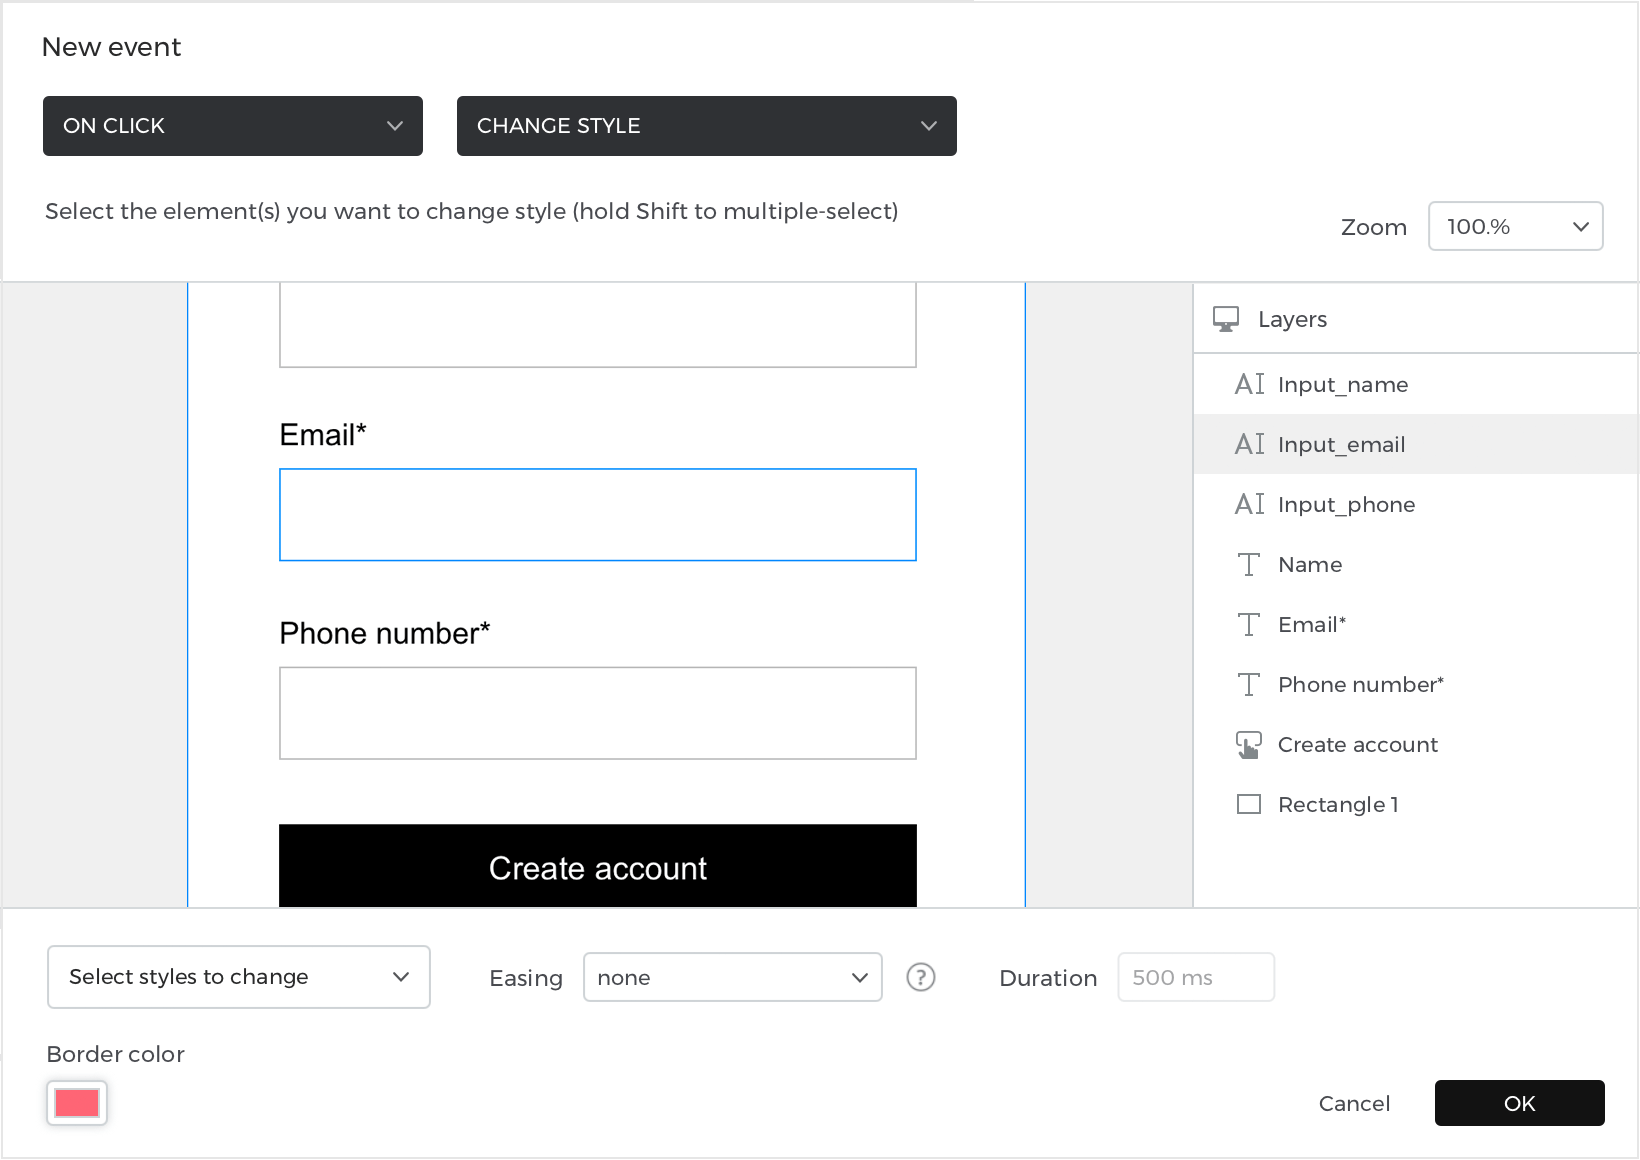 Change the input field color to red